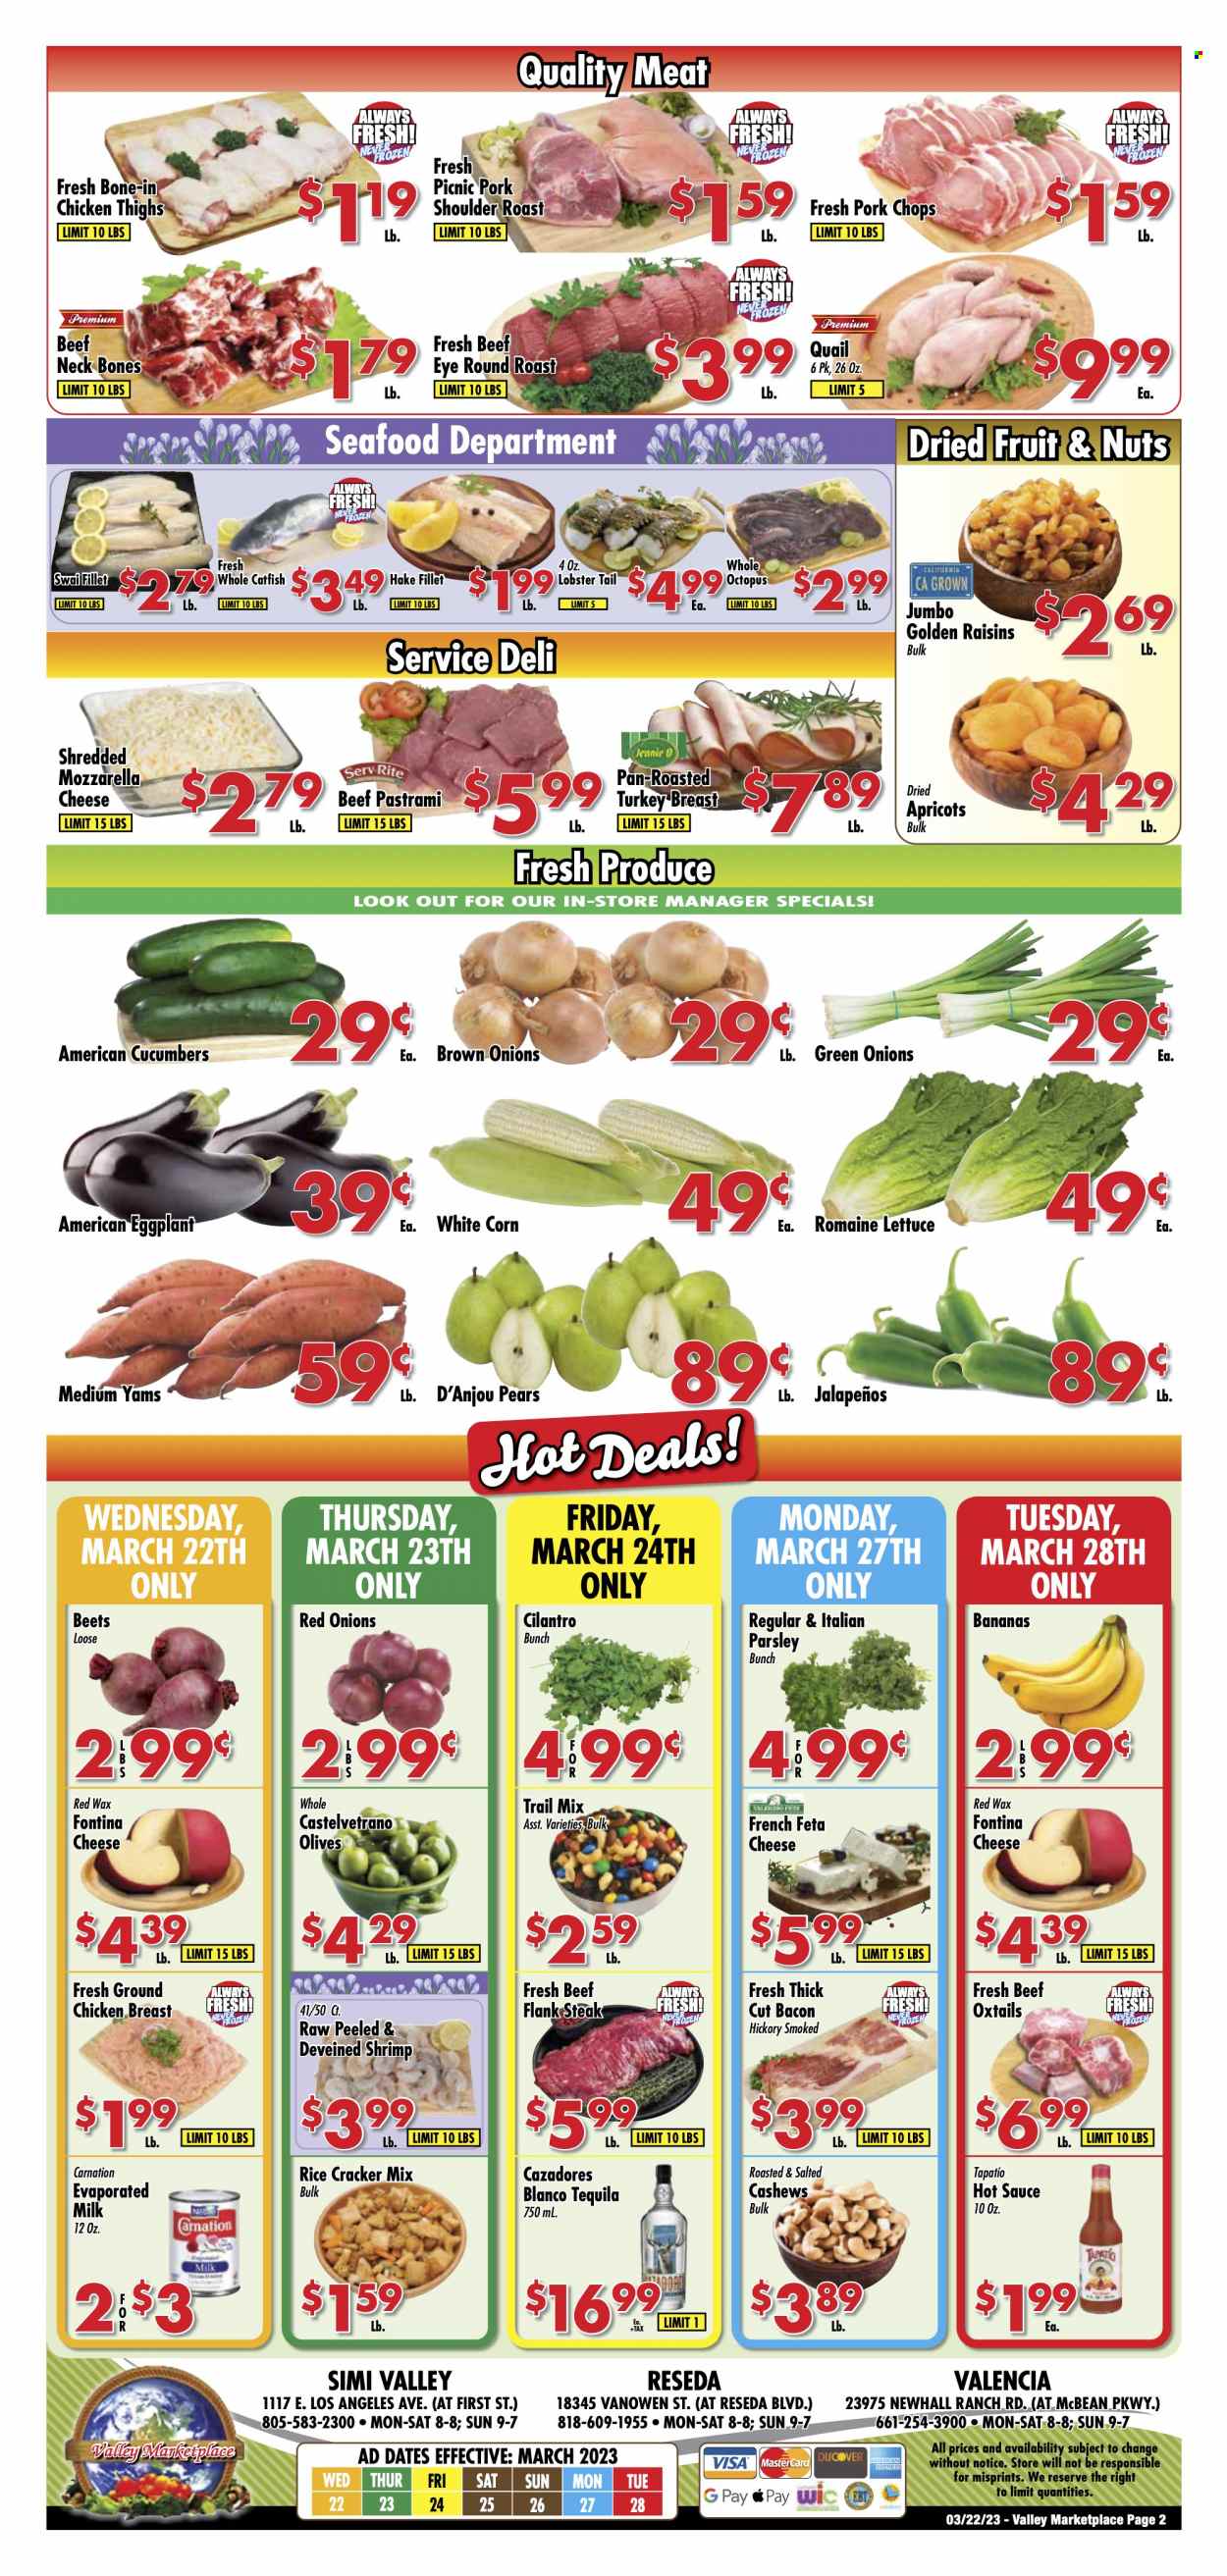 thumbnail - Valley Marketplace Flyer - 03/22/2023 - 03/28/2023 - Sales products - corn, cucumber, red onions, parsley, lettuce, eggplant, green onion, bananas, pears, apricots, catfish, lobster, octopus, seafood, hake, lobster tail, shrimps, swai fillet, hake fillet, sauce, roast, bacon, pastrami, Fontina, mozzarella, cheese, feta, evaporated milk, crackers, rice crackers, olives, rice, cilantro, hot sauce, cashews, raisins, dried fruit, trail mix, tequila, ground chicken, quail, chicken breasts, chicken thighs, chicken, beef meat, oxtail, steak, eye of round, round roast, flank steak, pork chops, pork meat, pork roast, pork shoulder. Page 2.